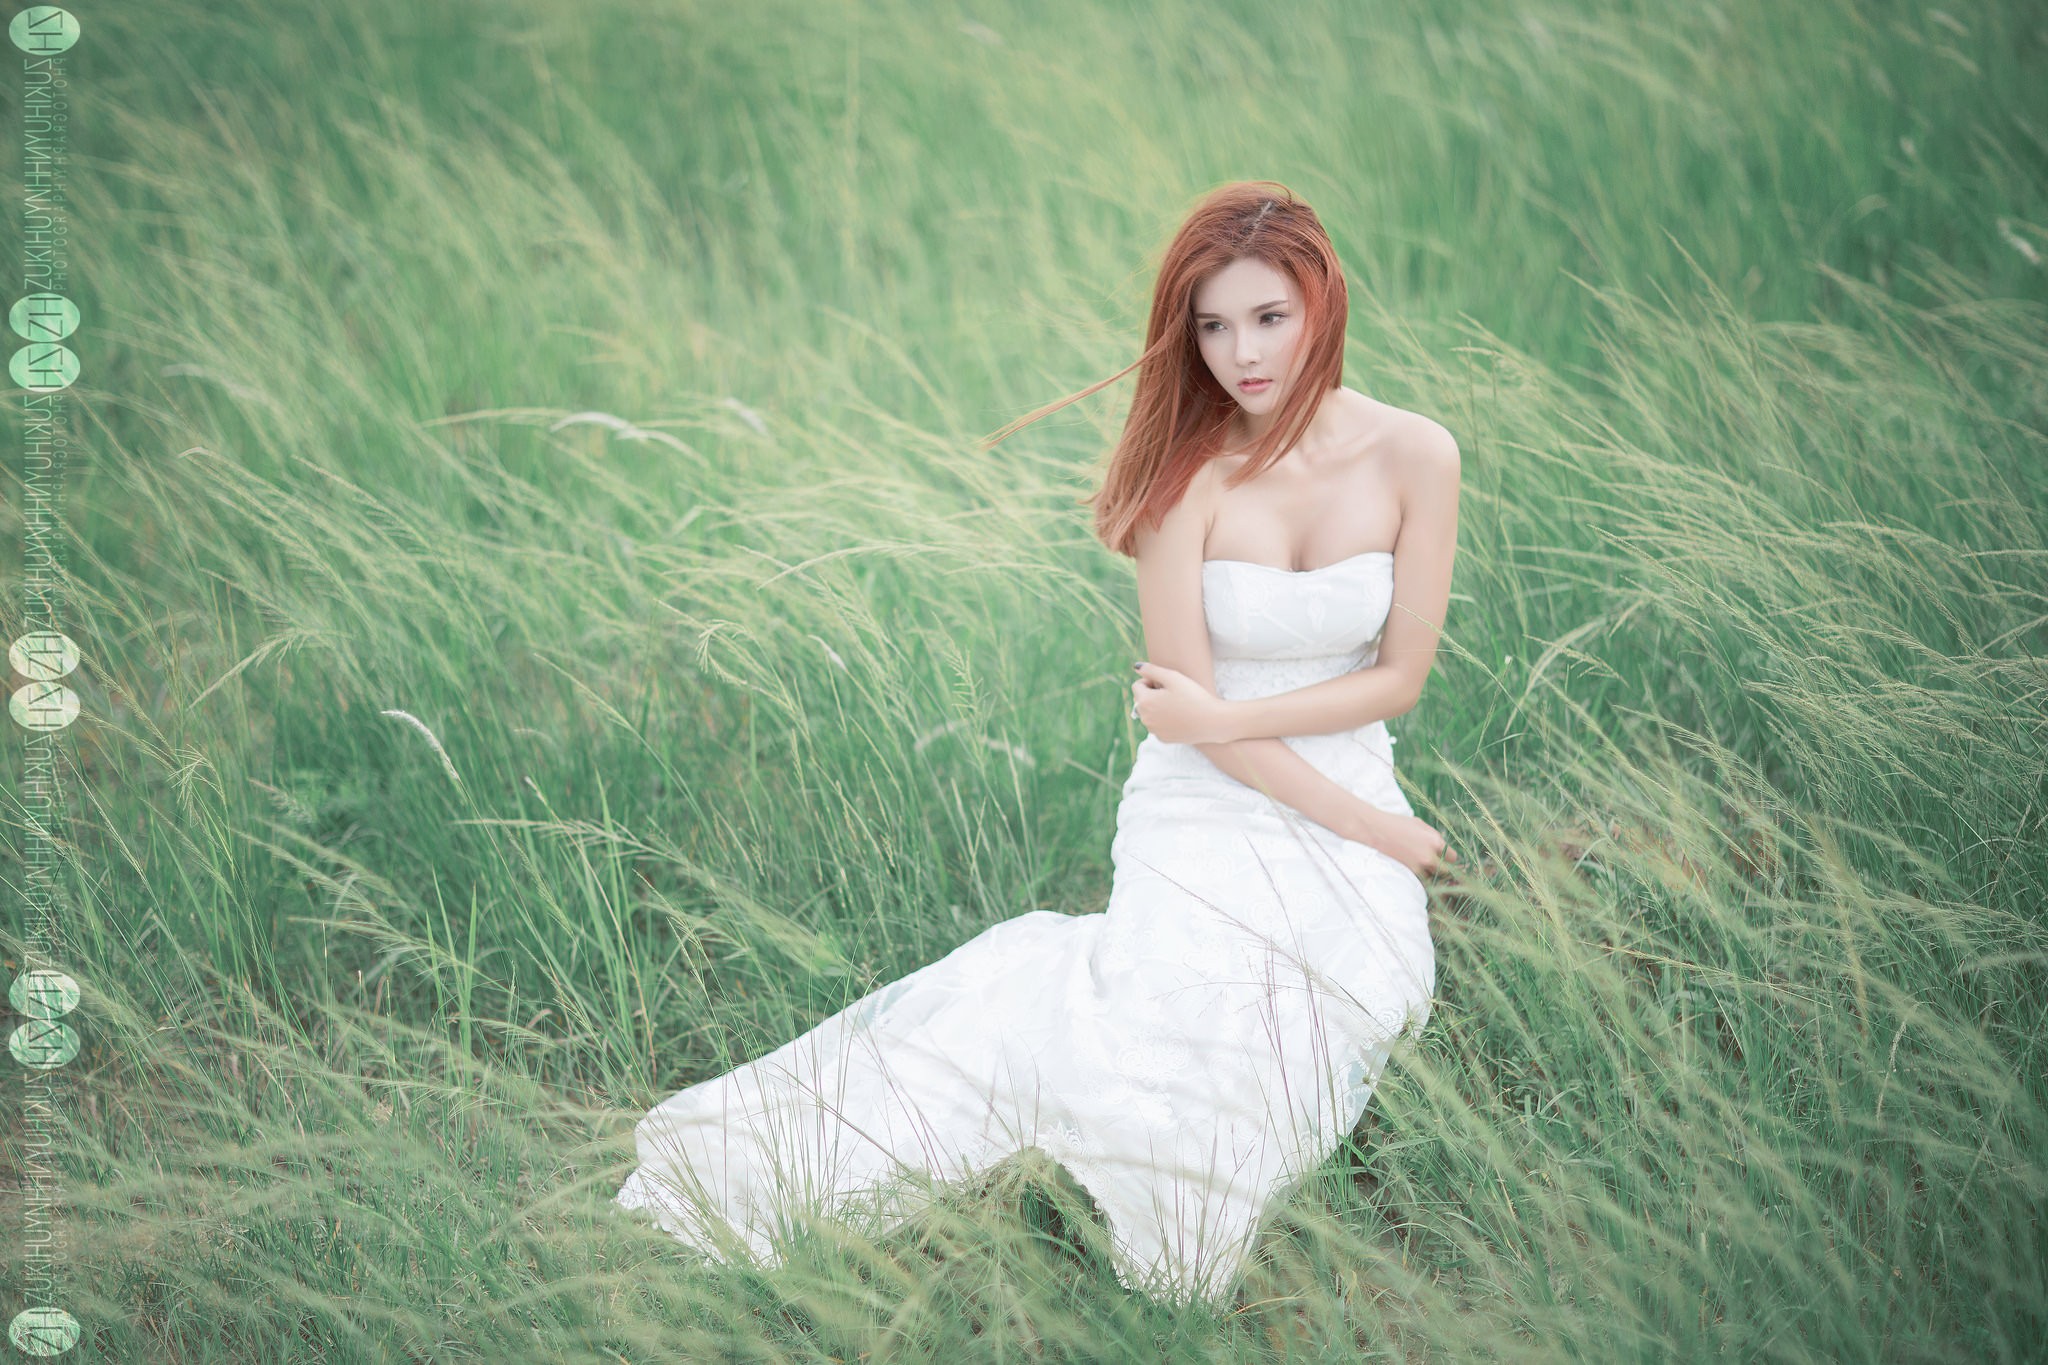 People 2048x1365 redhead women outdoors brides long hair women Asian model grass dress white dress white clothing watermarked arms crossed dyed hair field